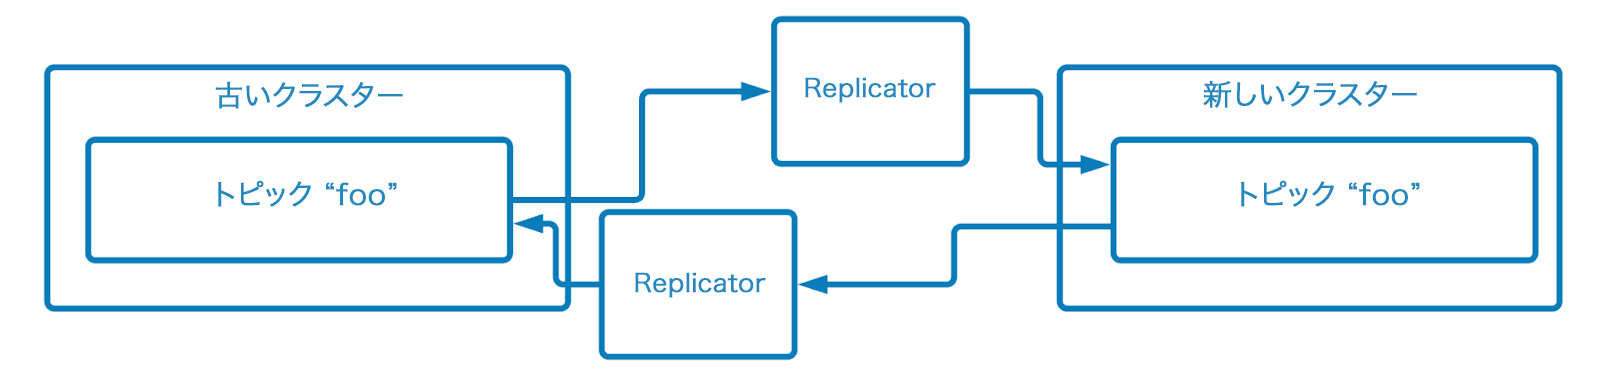 ../../_images/migrate-with-replicator.ja.png